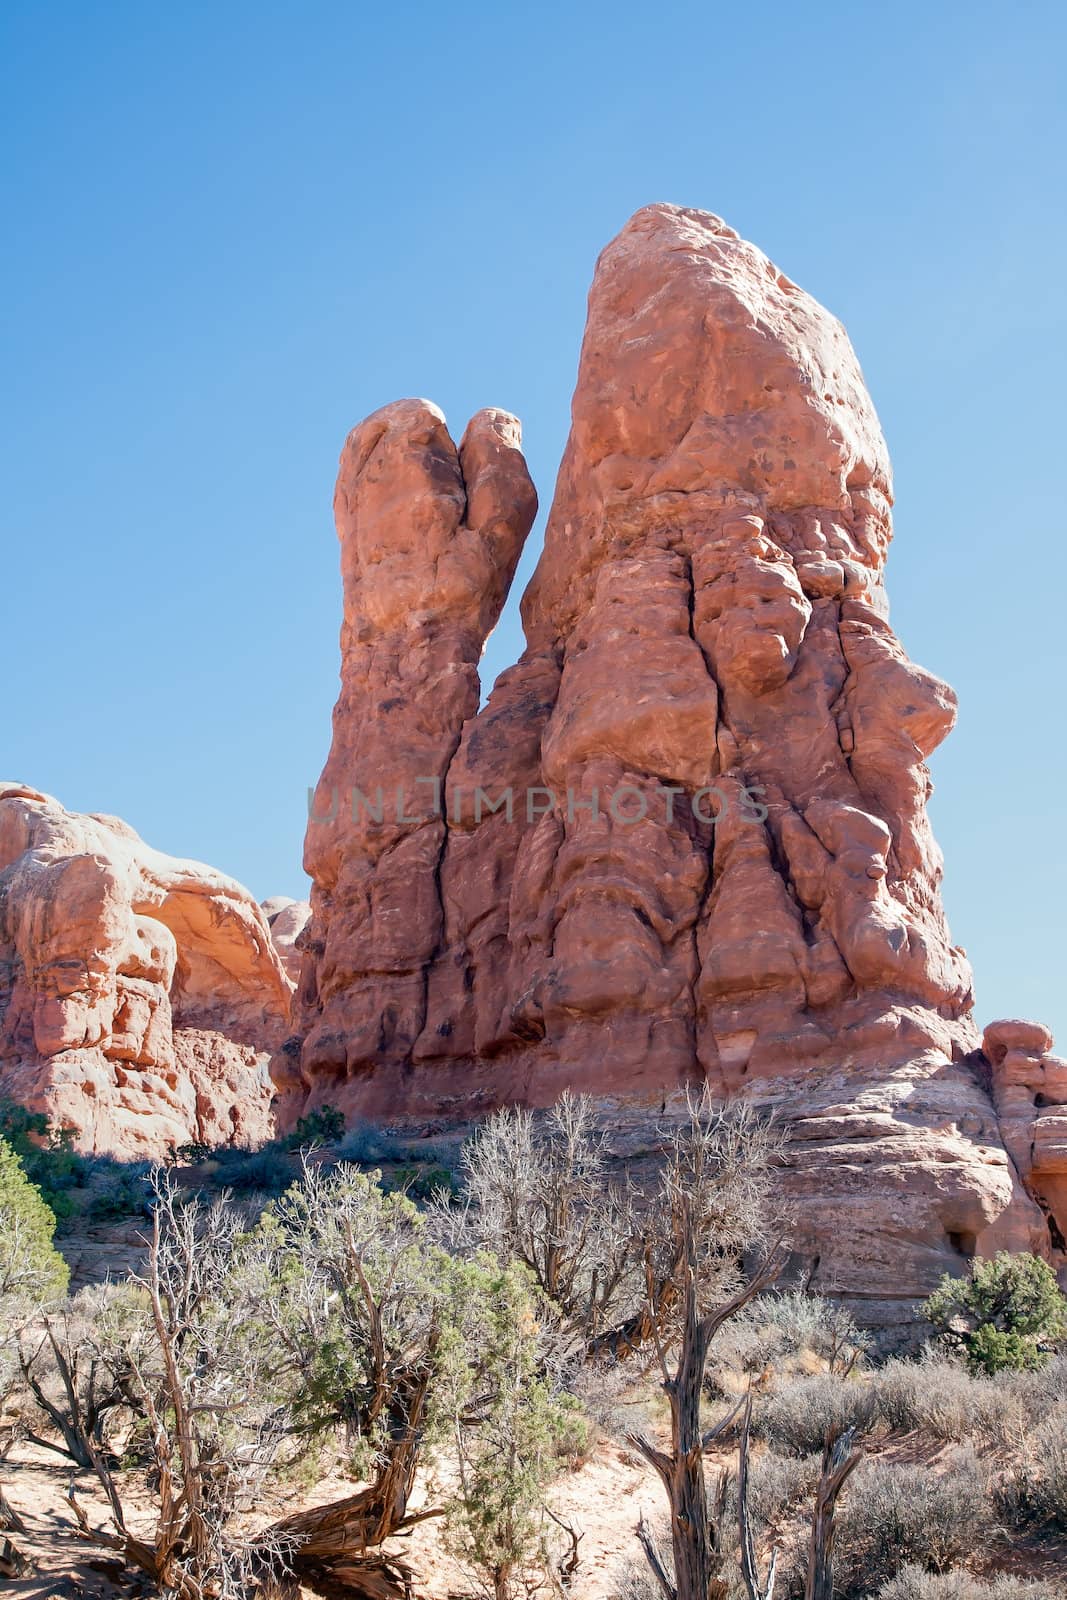 This large rock formation at Arches National Park appears to be holding up a hand and waving.